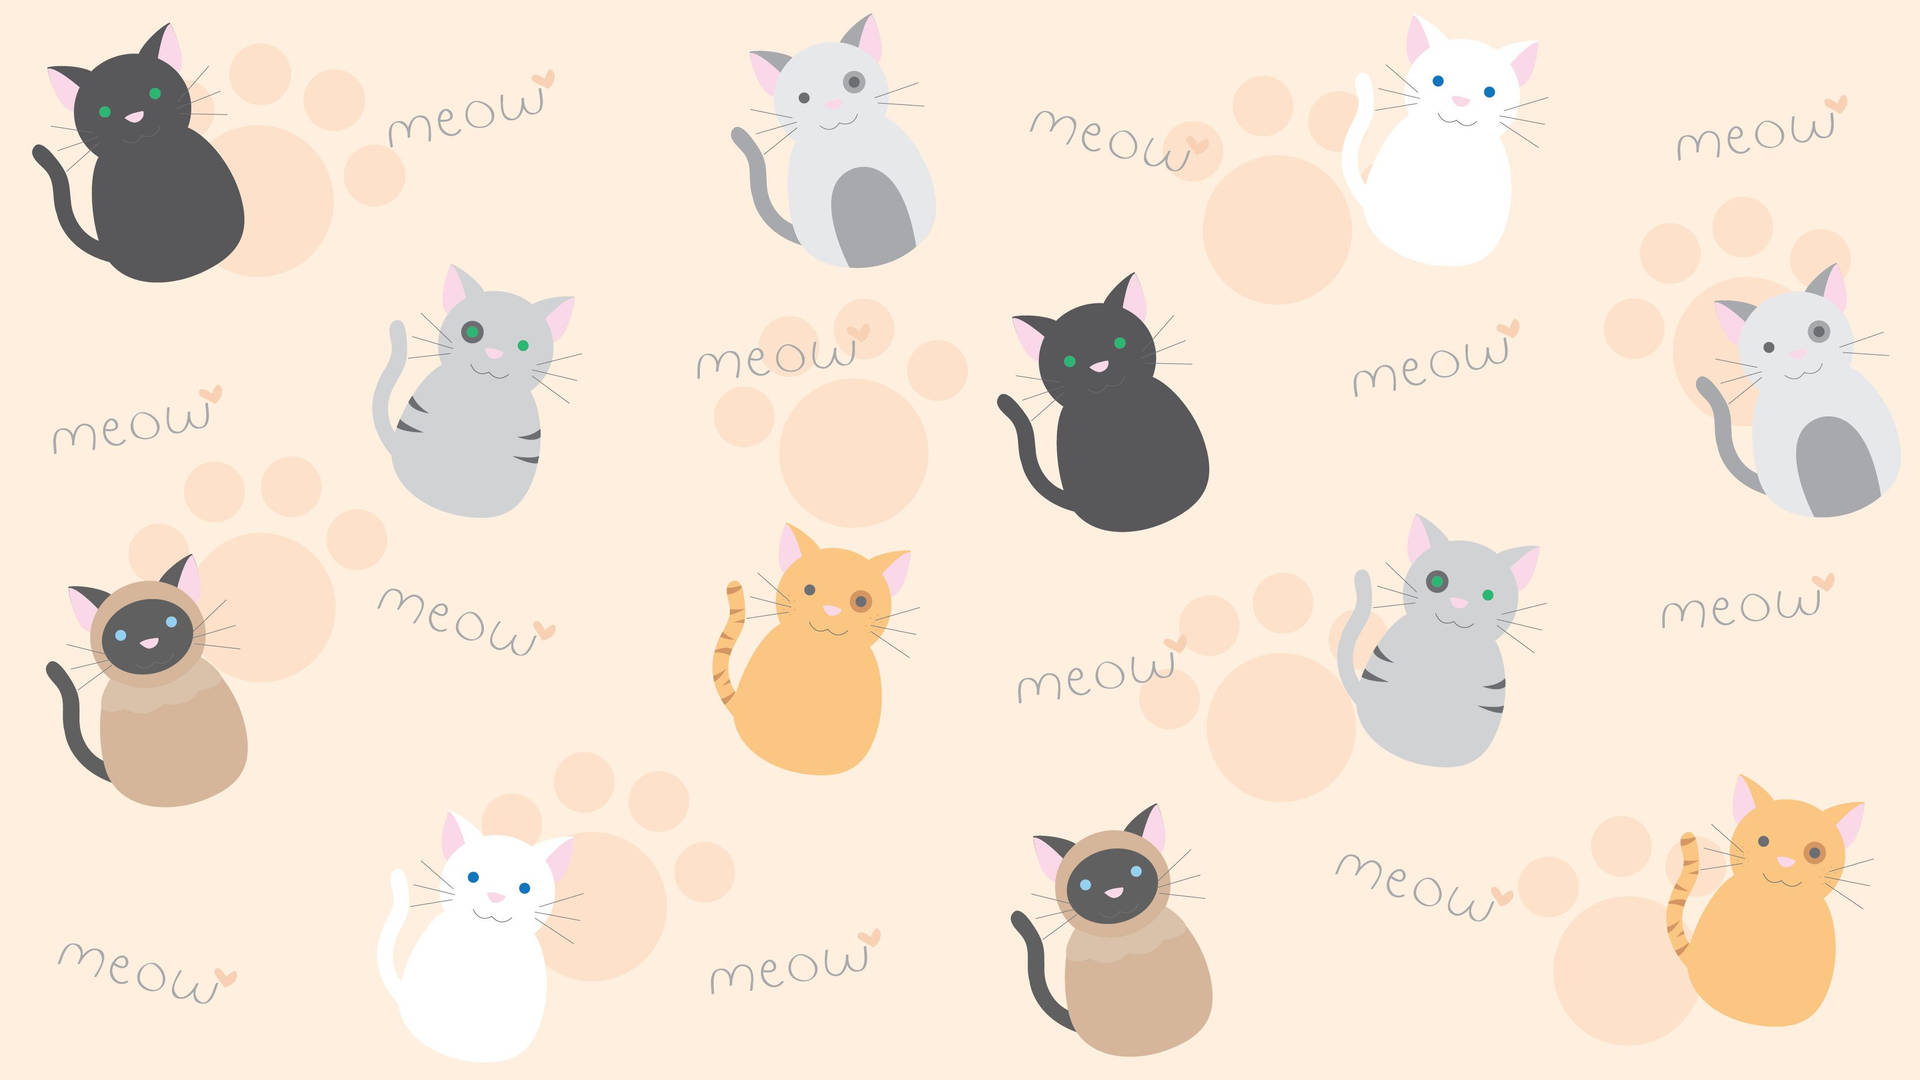 Cat And Meow Prints On Kawaii Ipad Picture